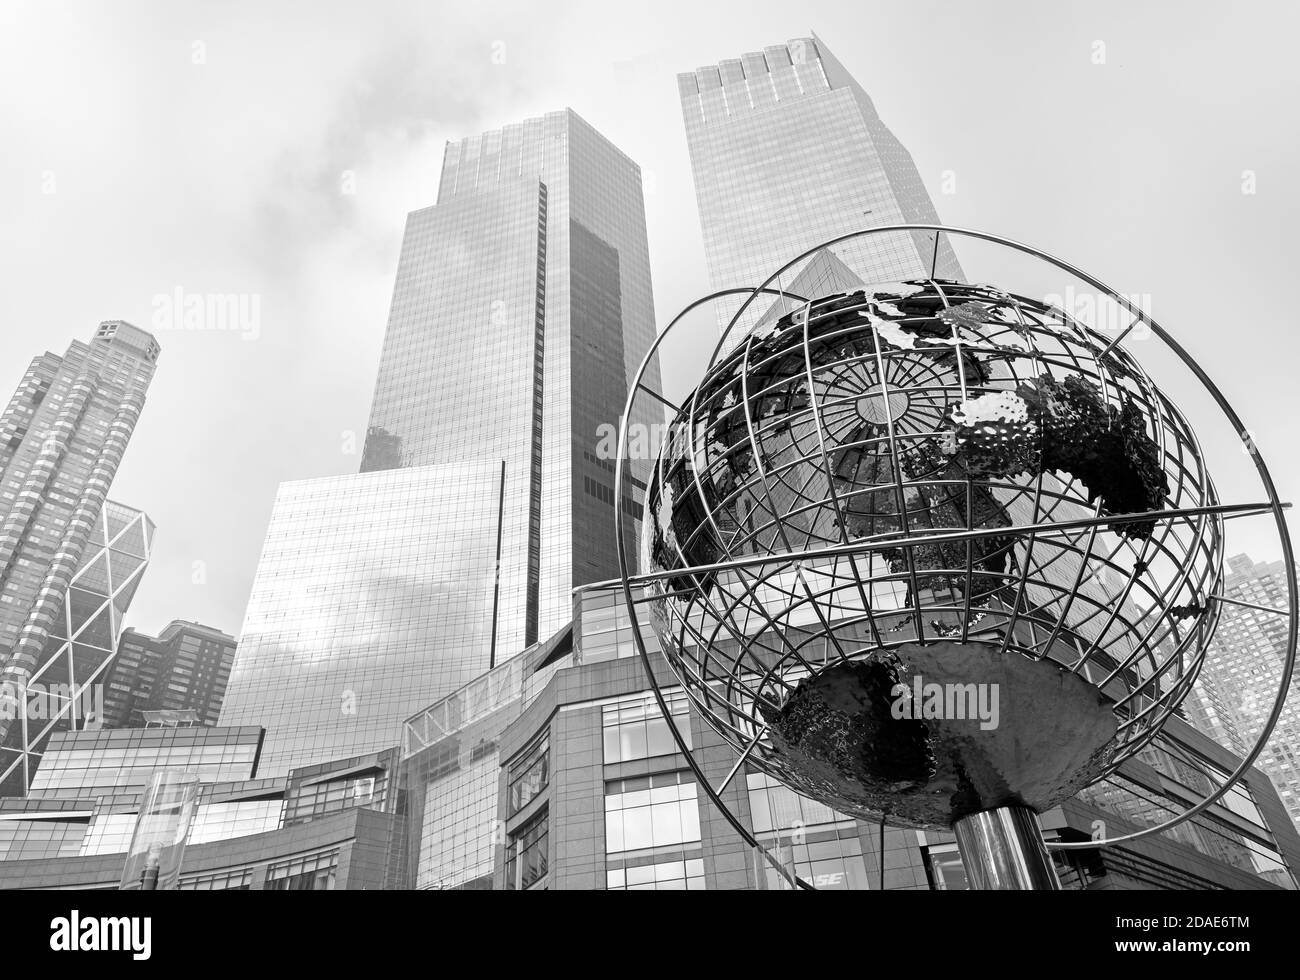 New York, USA - Sep 16, 2017:  Iconic sculpture of Earth in front of Trump Towers at Columbus Circle in Manhattan. Stainless steel Unisphere sculpture Stock Photo